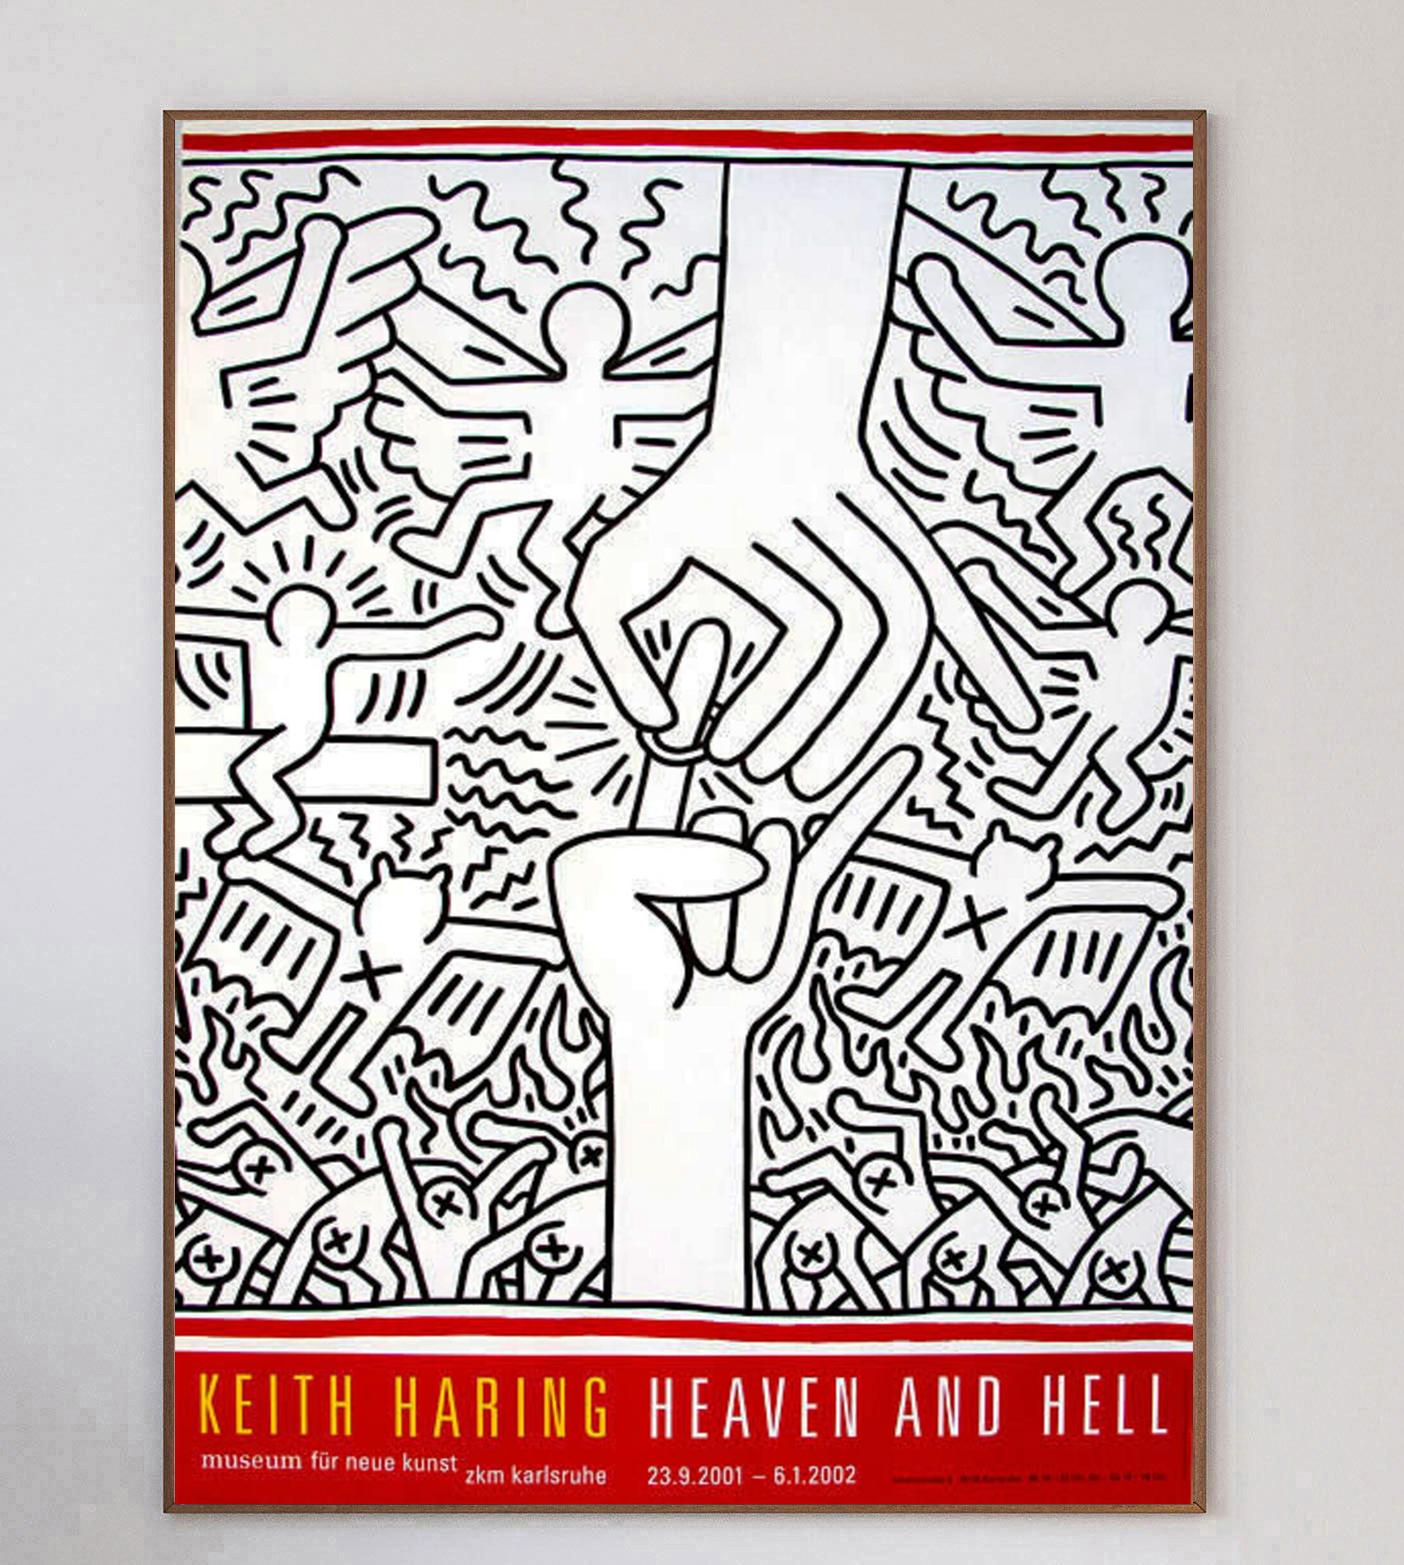 Brilliant original exhibition poster for the Keith Haring exhibition at ZKM Karlsruhe in Germany. Held between September 2001 and January 2002, the exhibition 